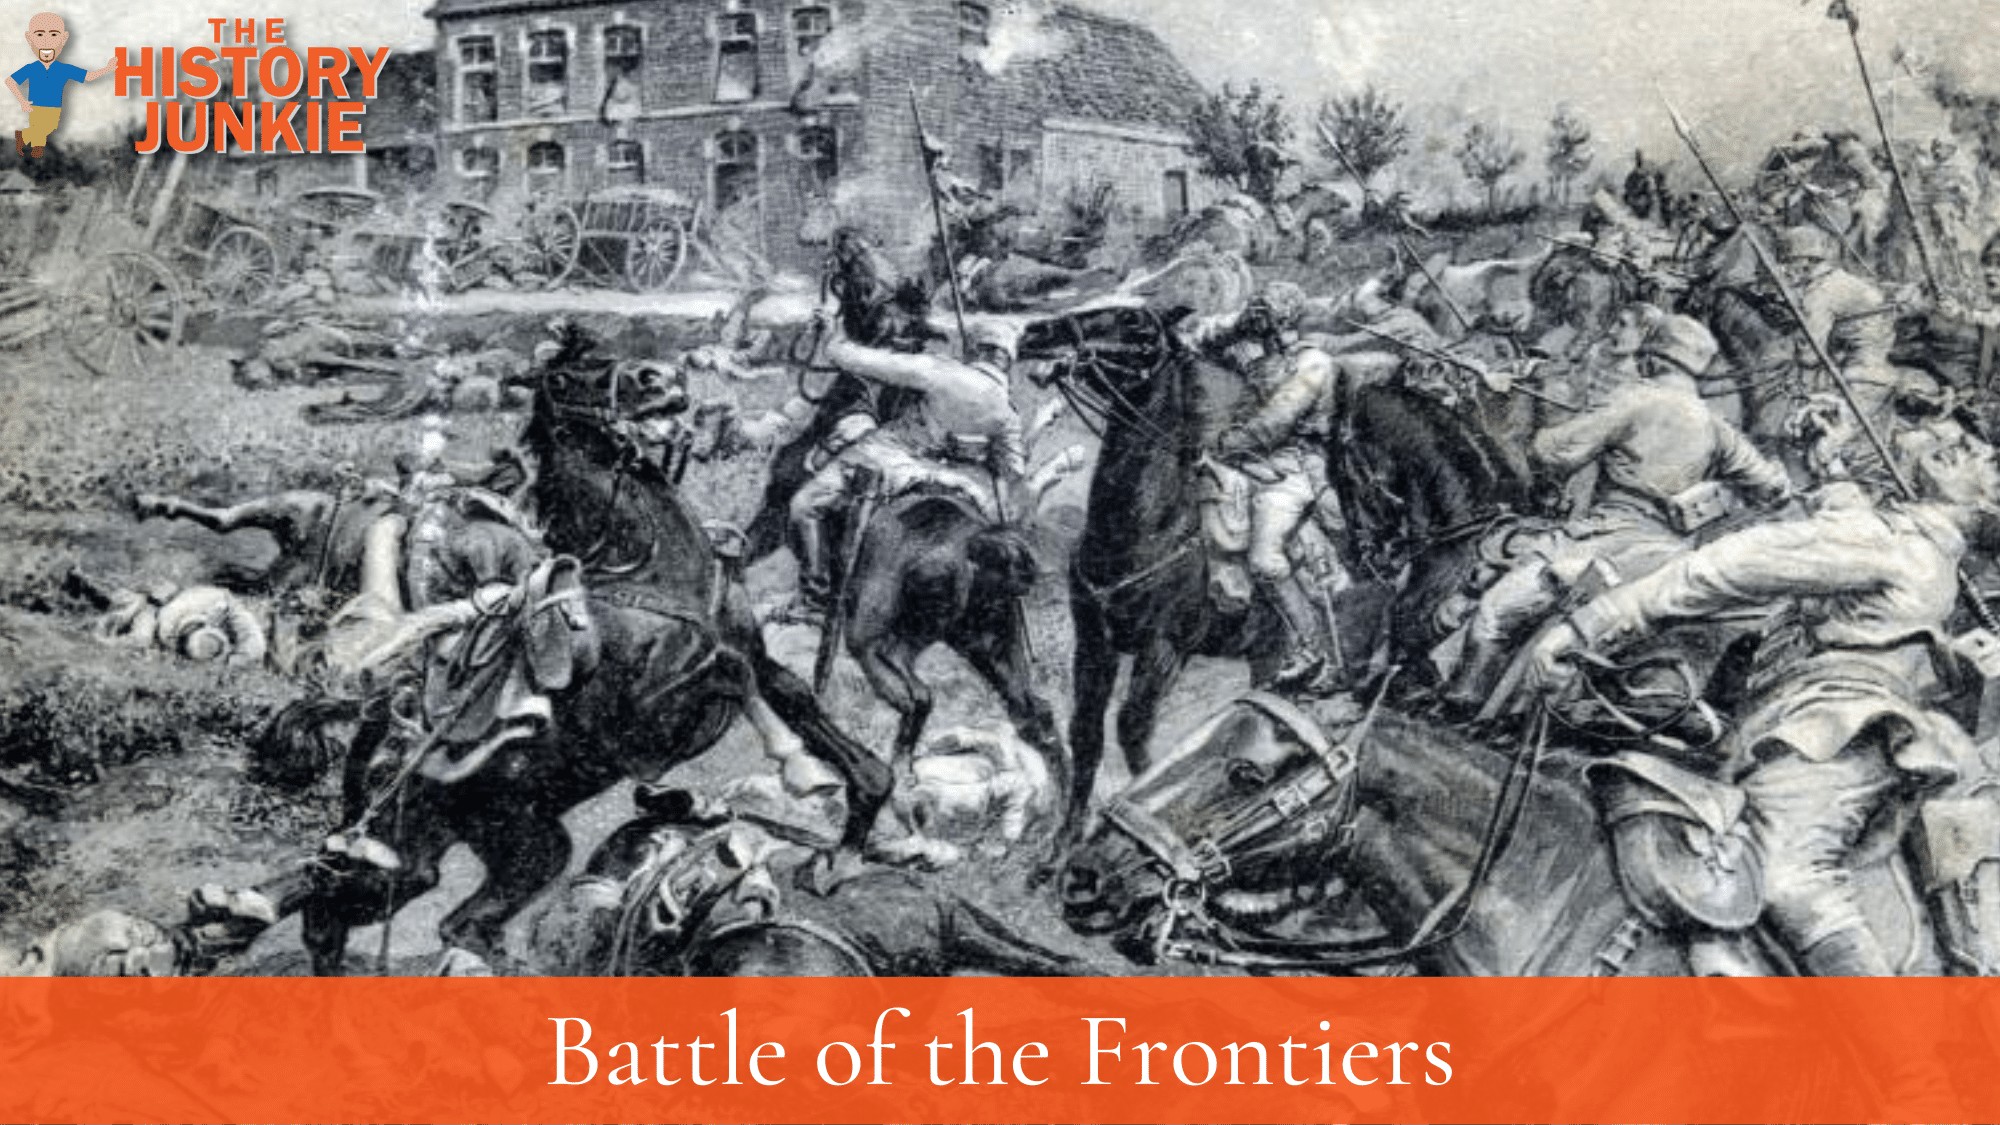 Battle of the Frontiers